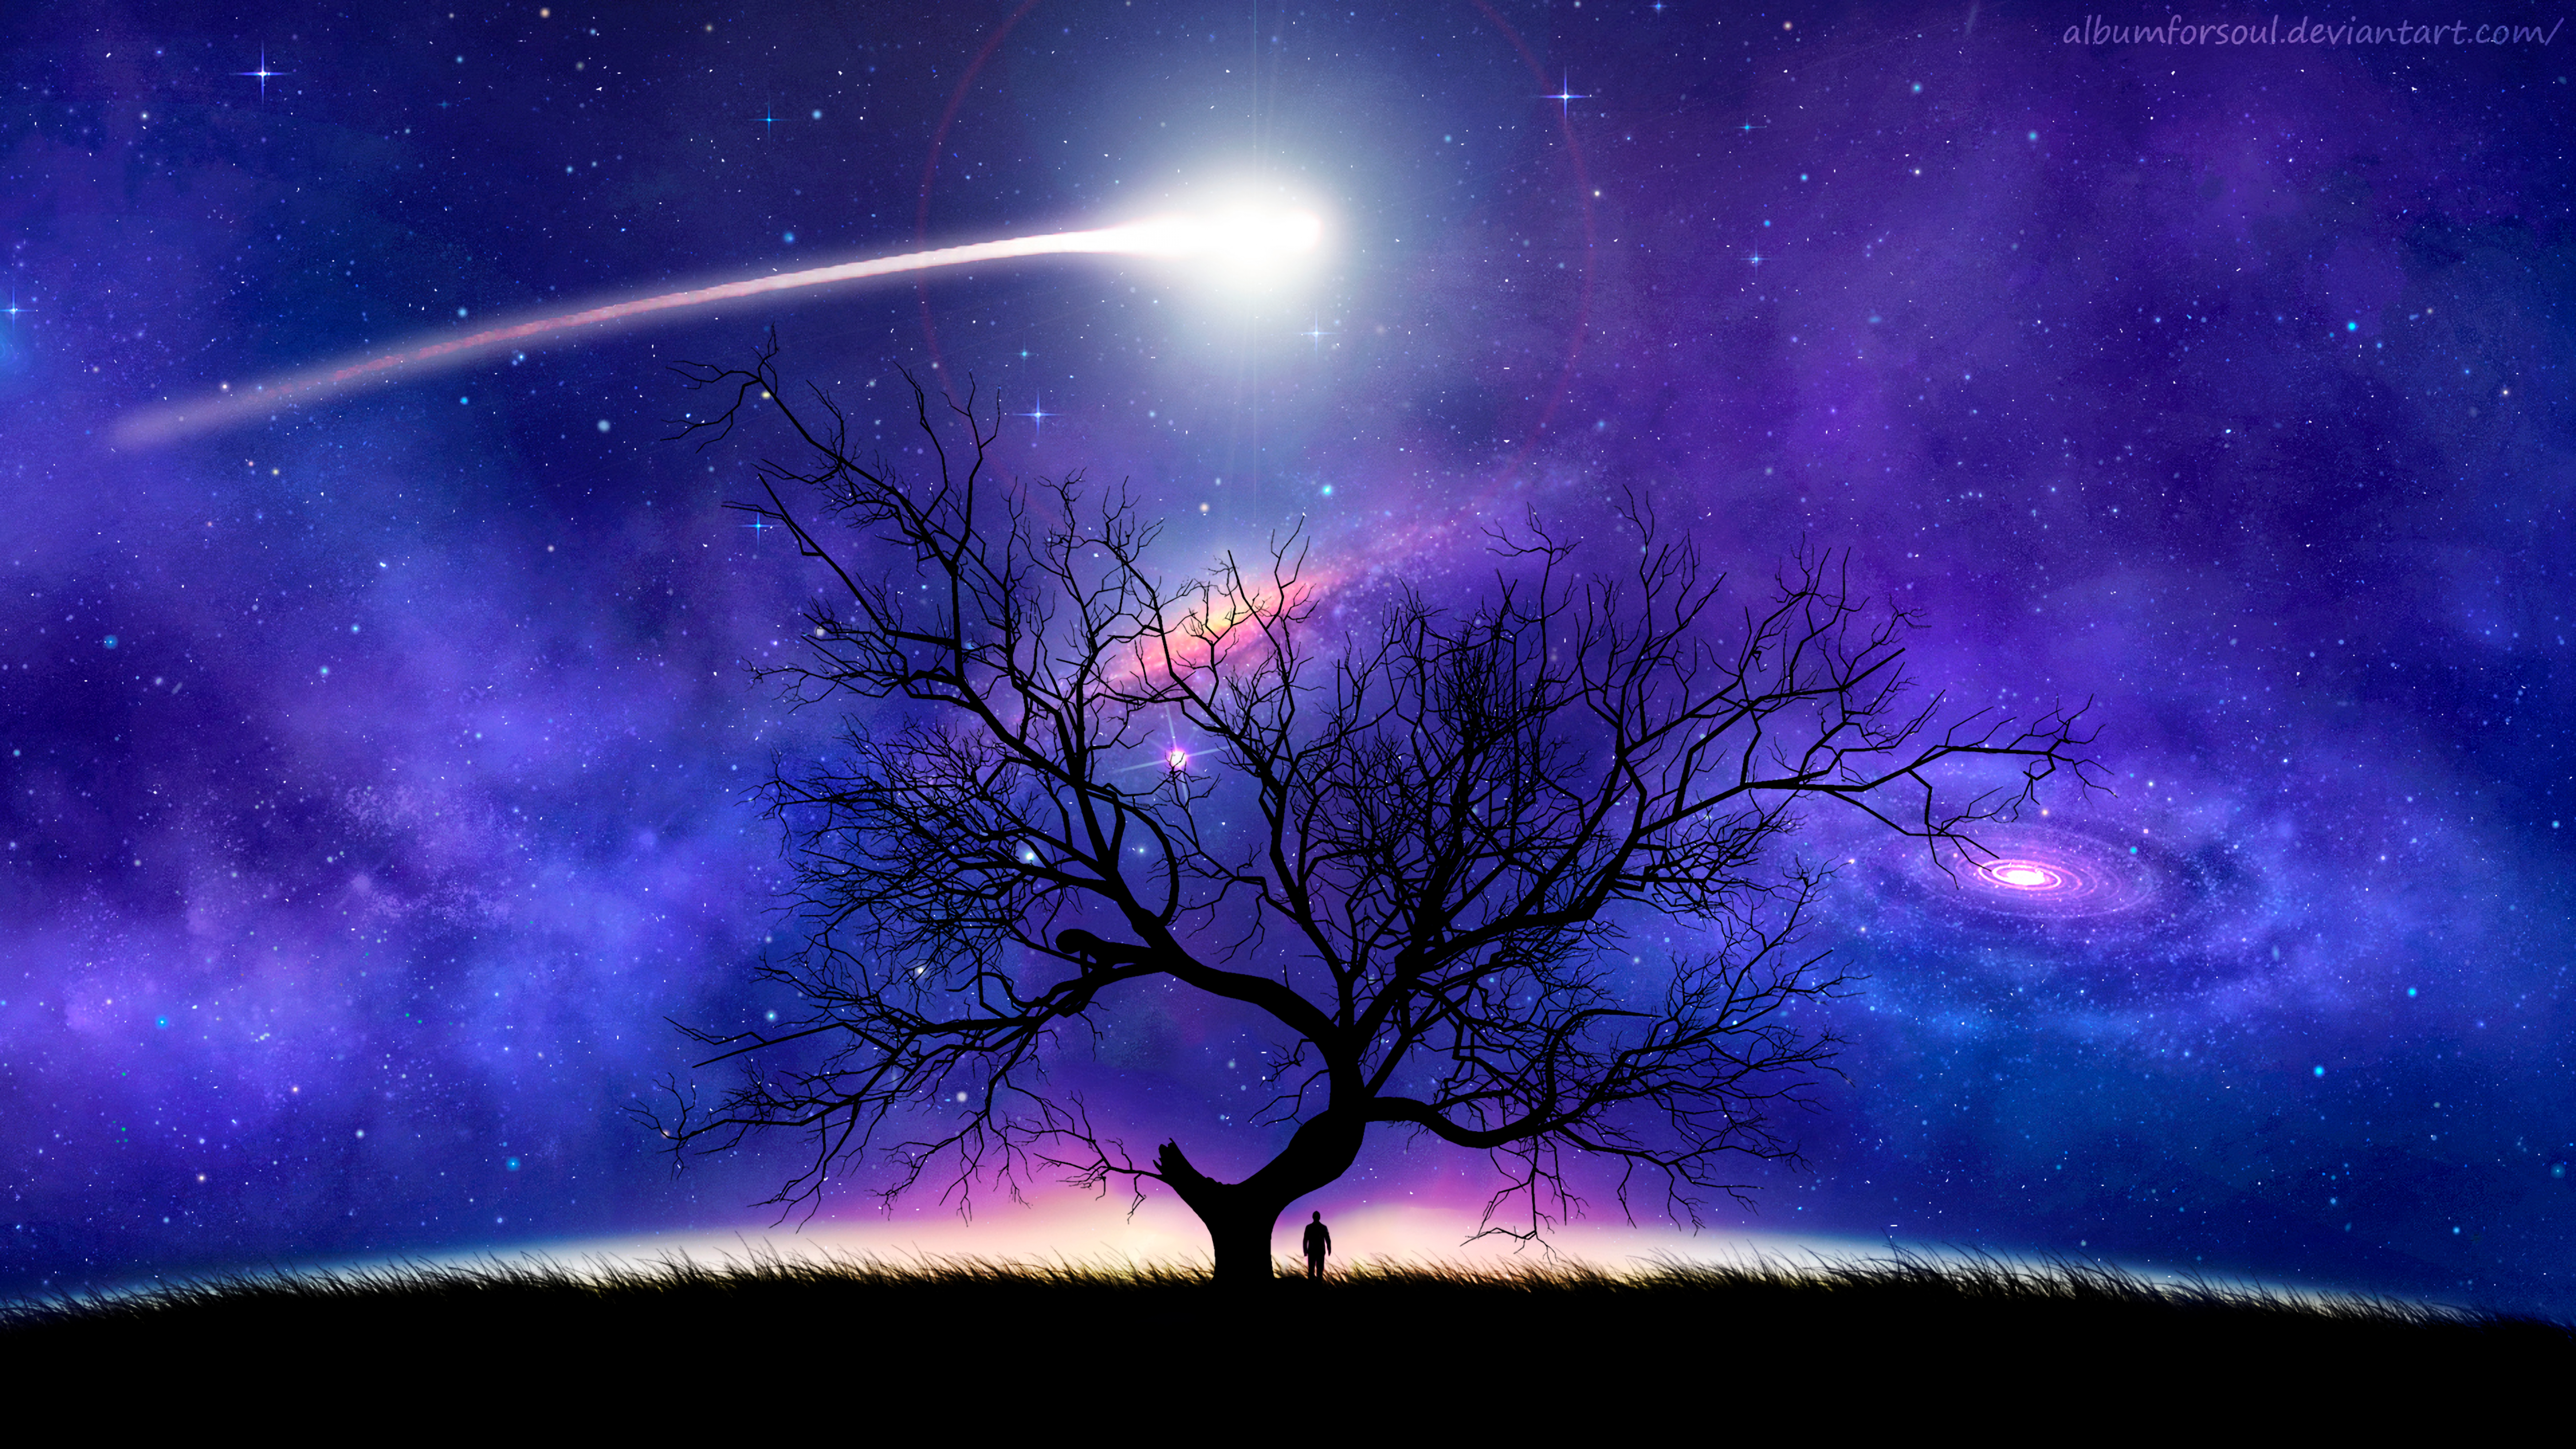 android night, silhouette, universe, comet, art, tree, wood, starry sky